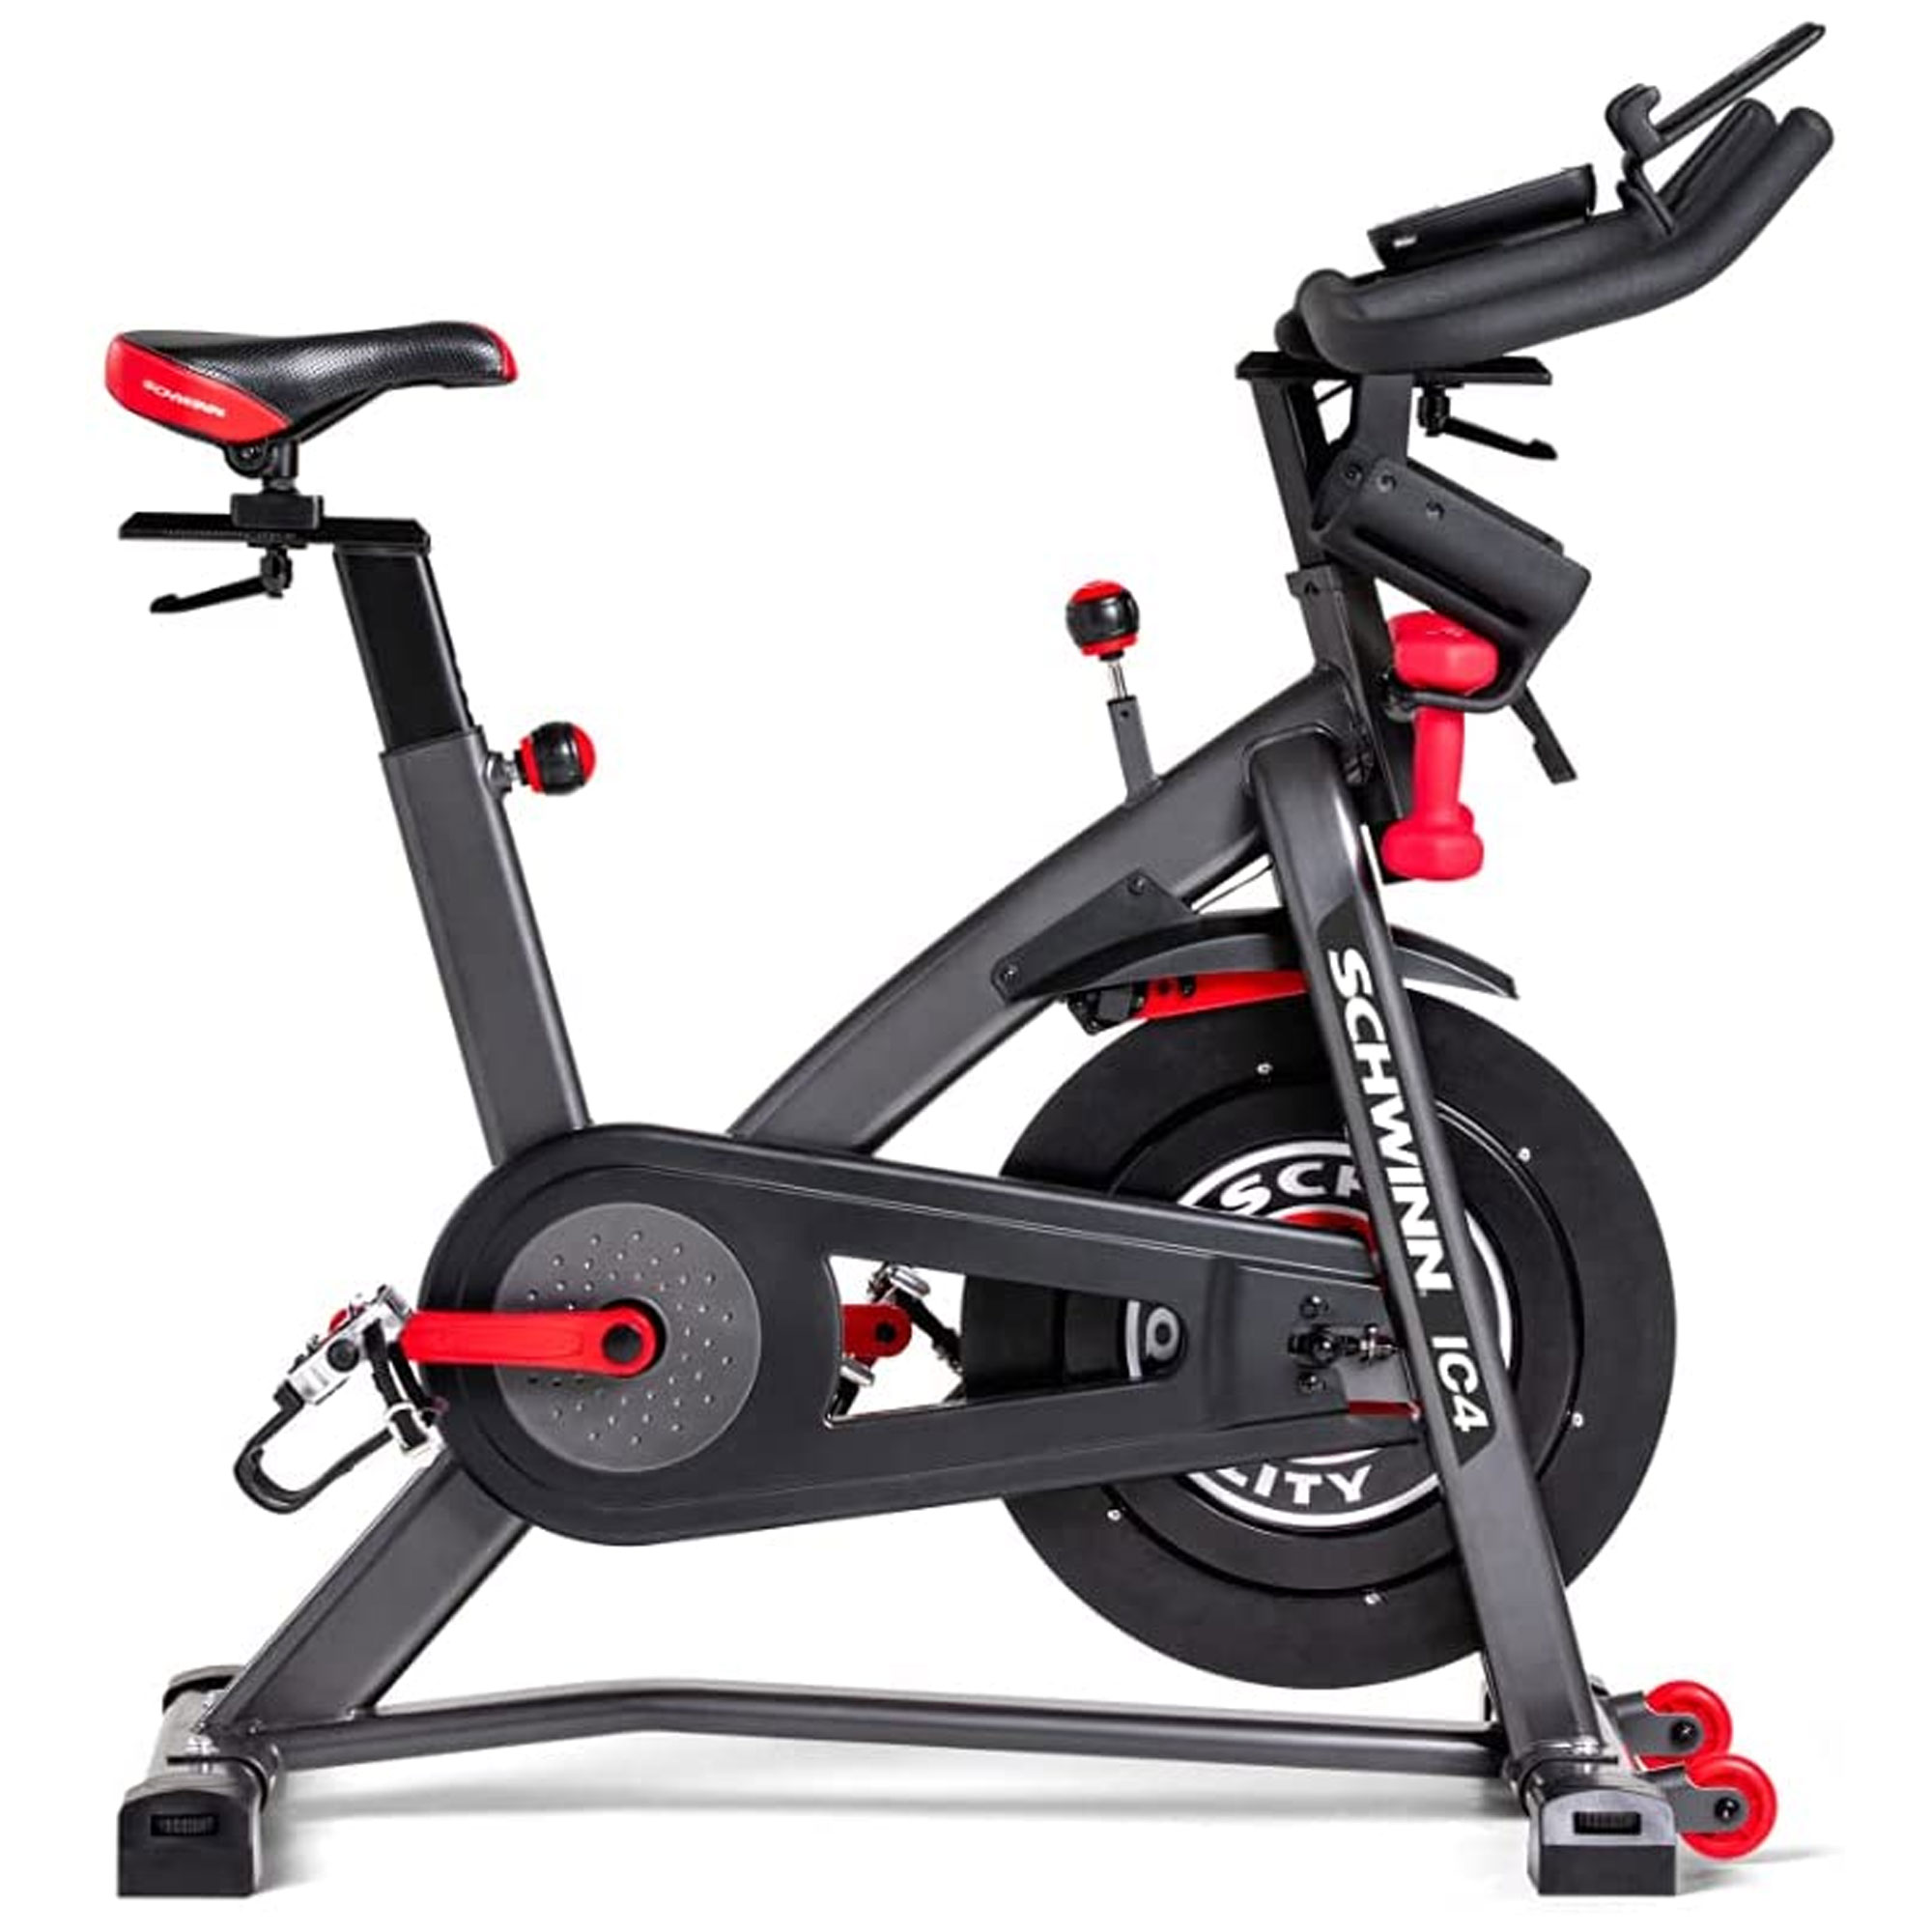 Schwinn Fitness IC4 Indoor Stationary Exercise Cycling Training Bike, Free 2-Month JRNY Membership - image 1 of 14